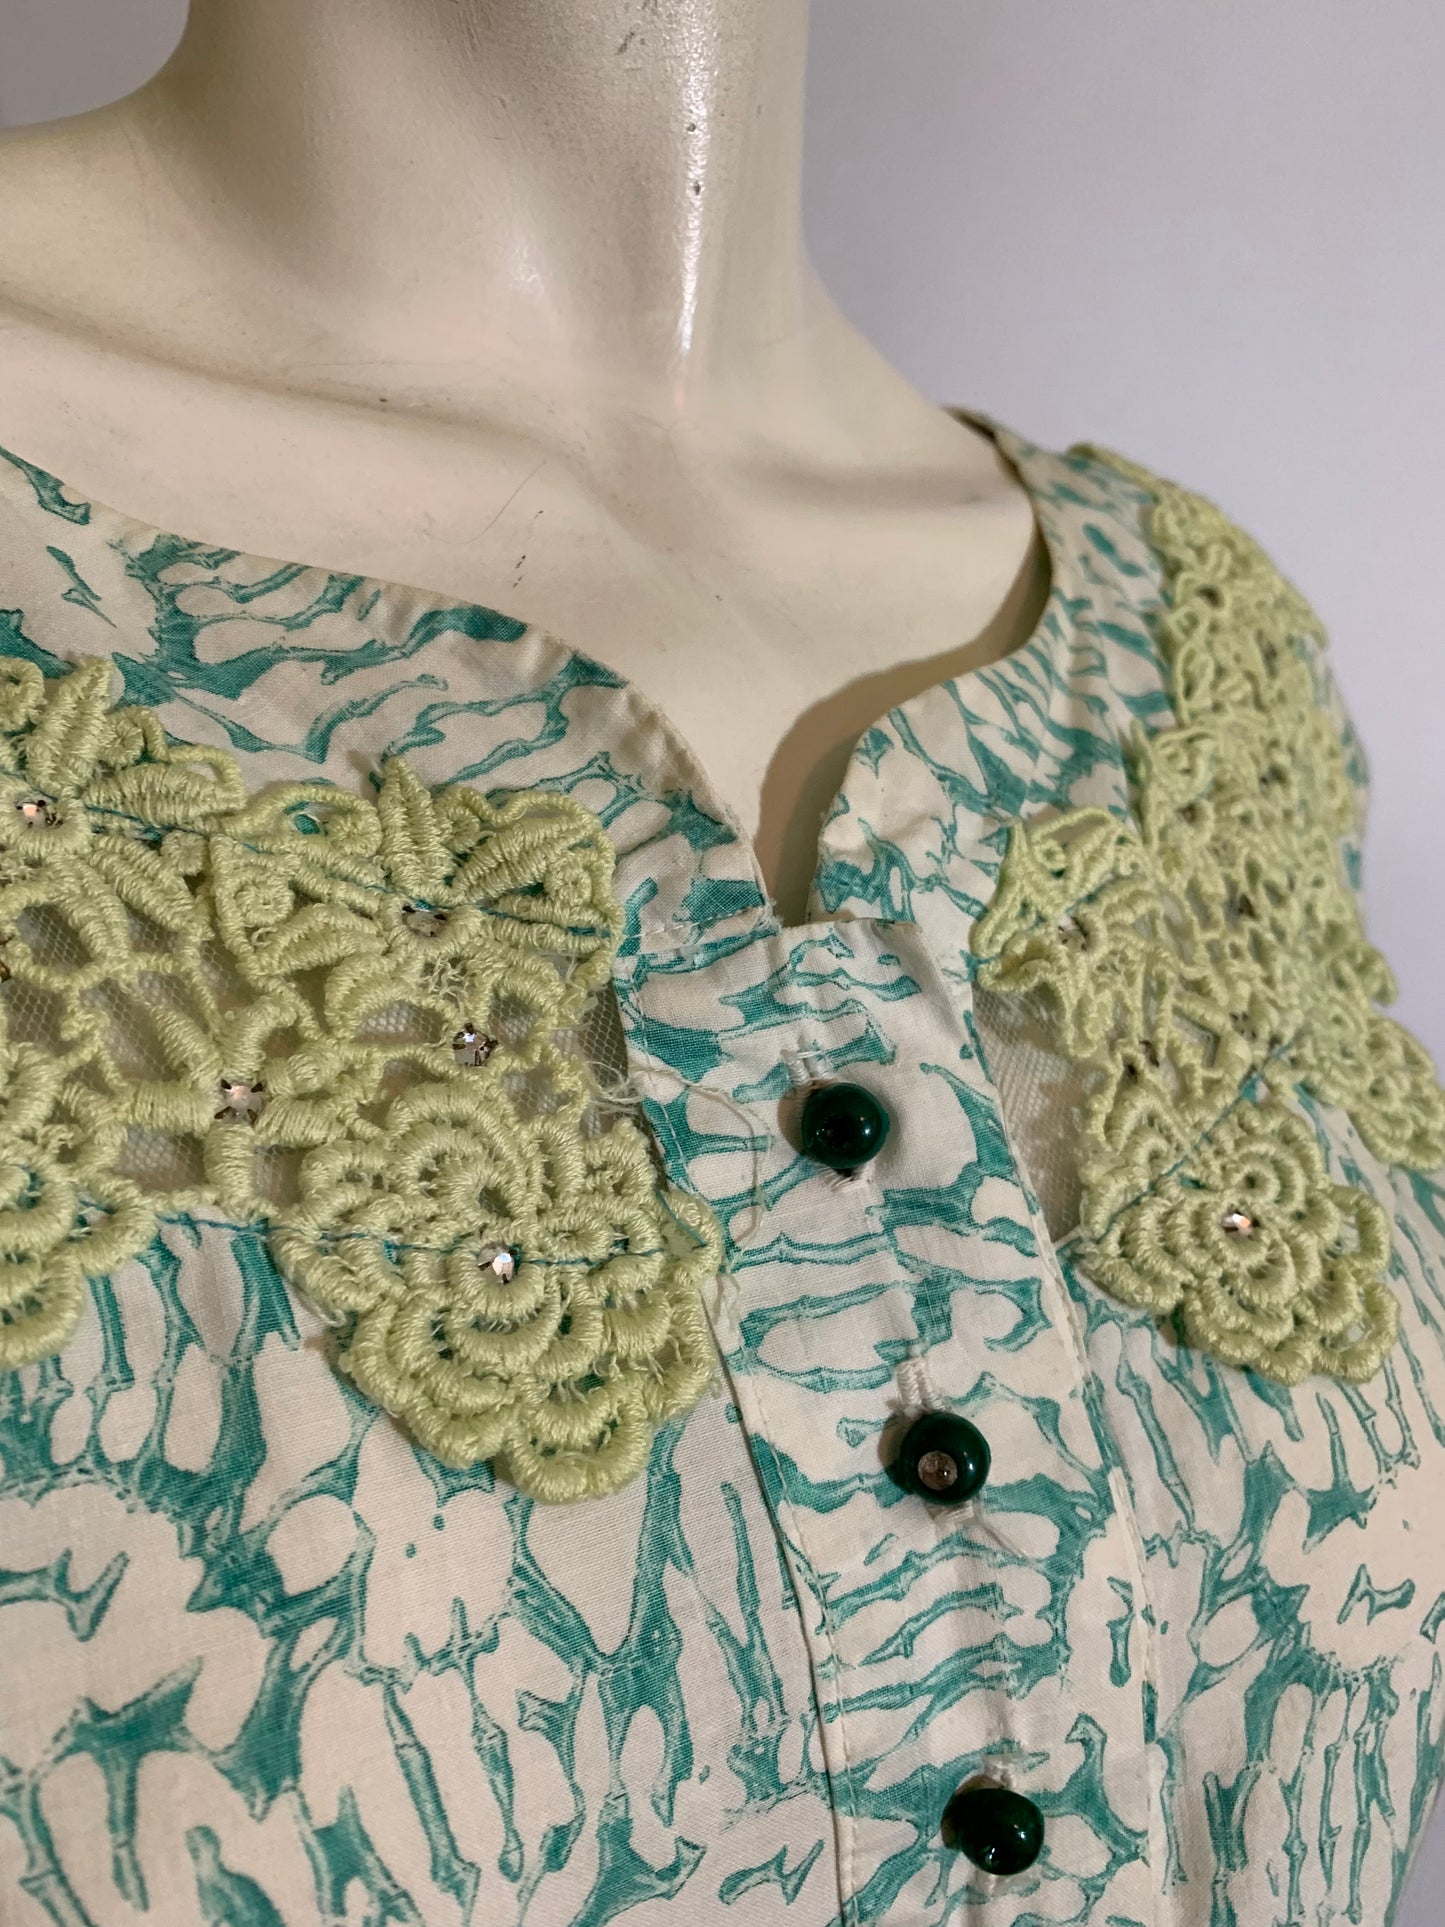 Aqua and Green Abstract Print Lace and Rhinestone Trimmed Dress circa 1950s